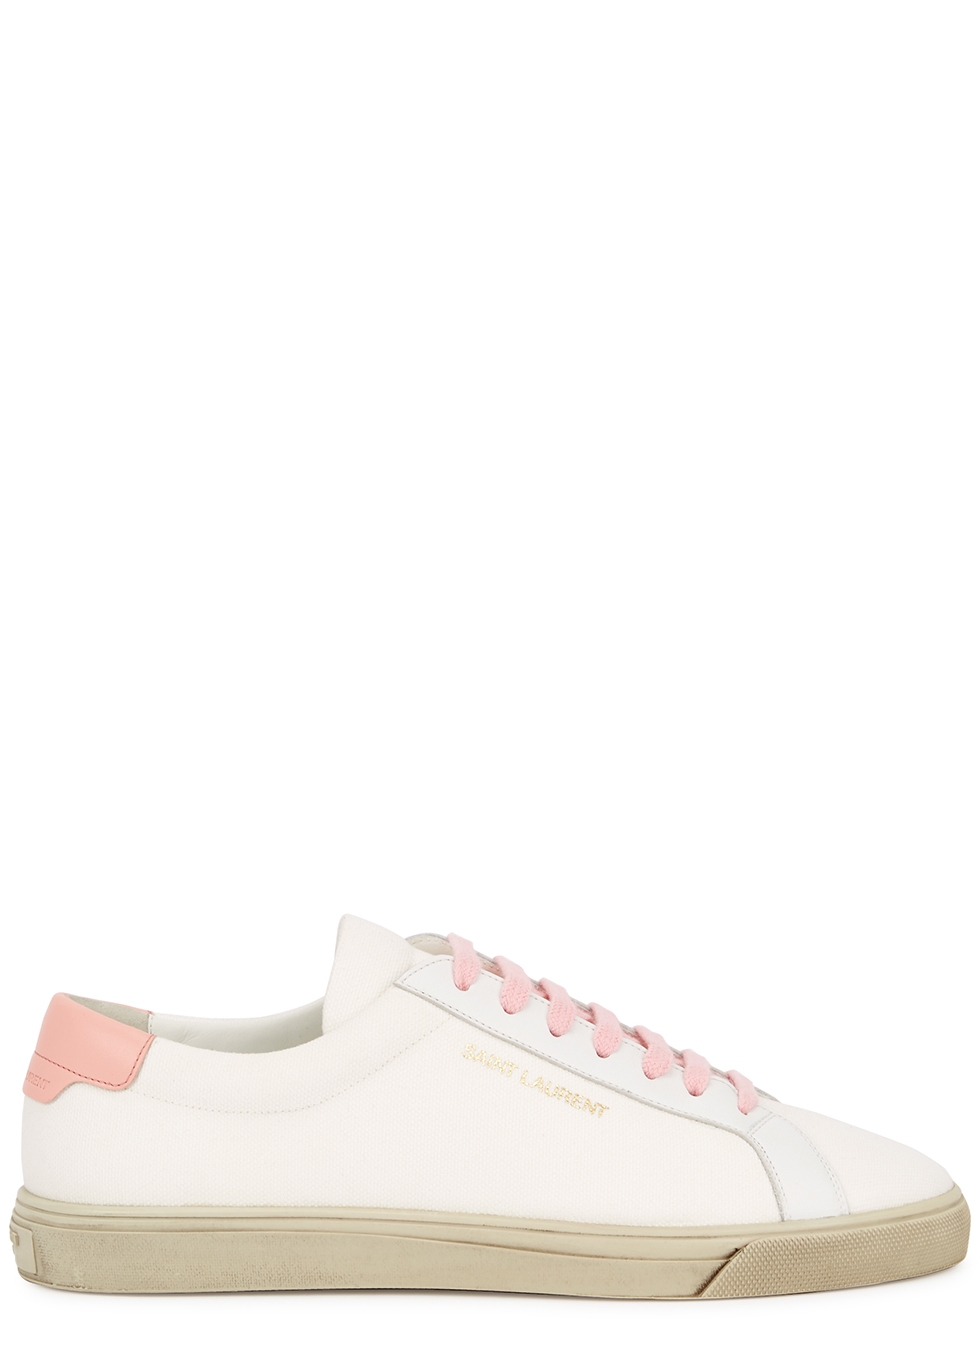 Andy off-white canvas sneakers